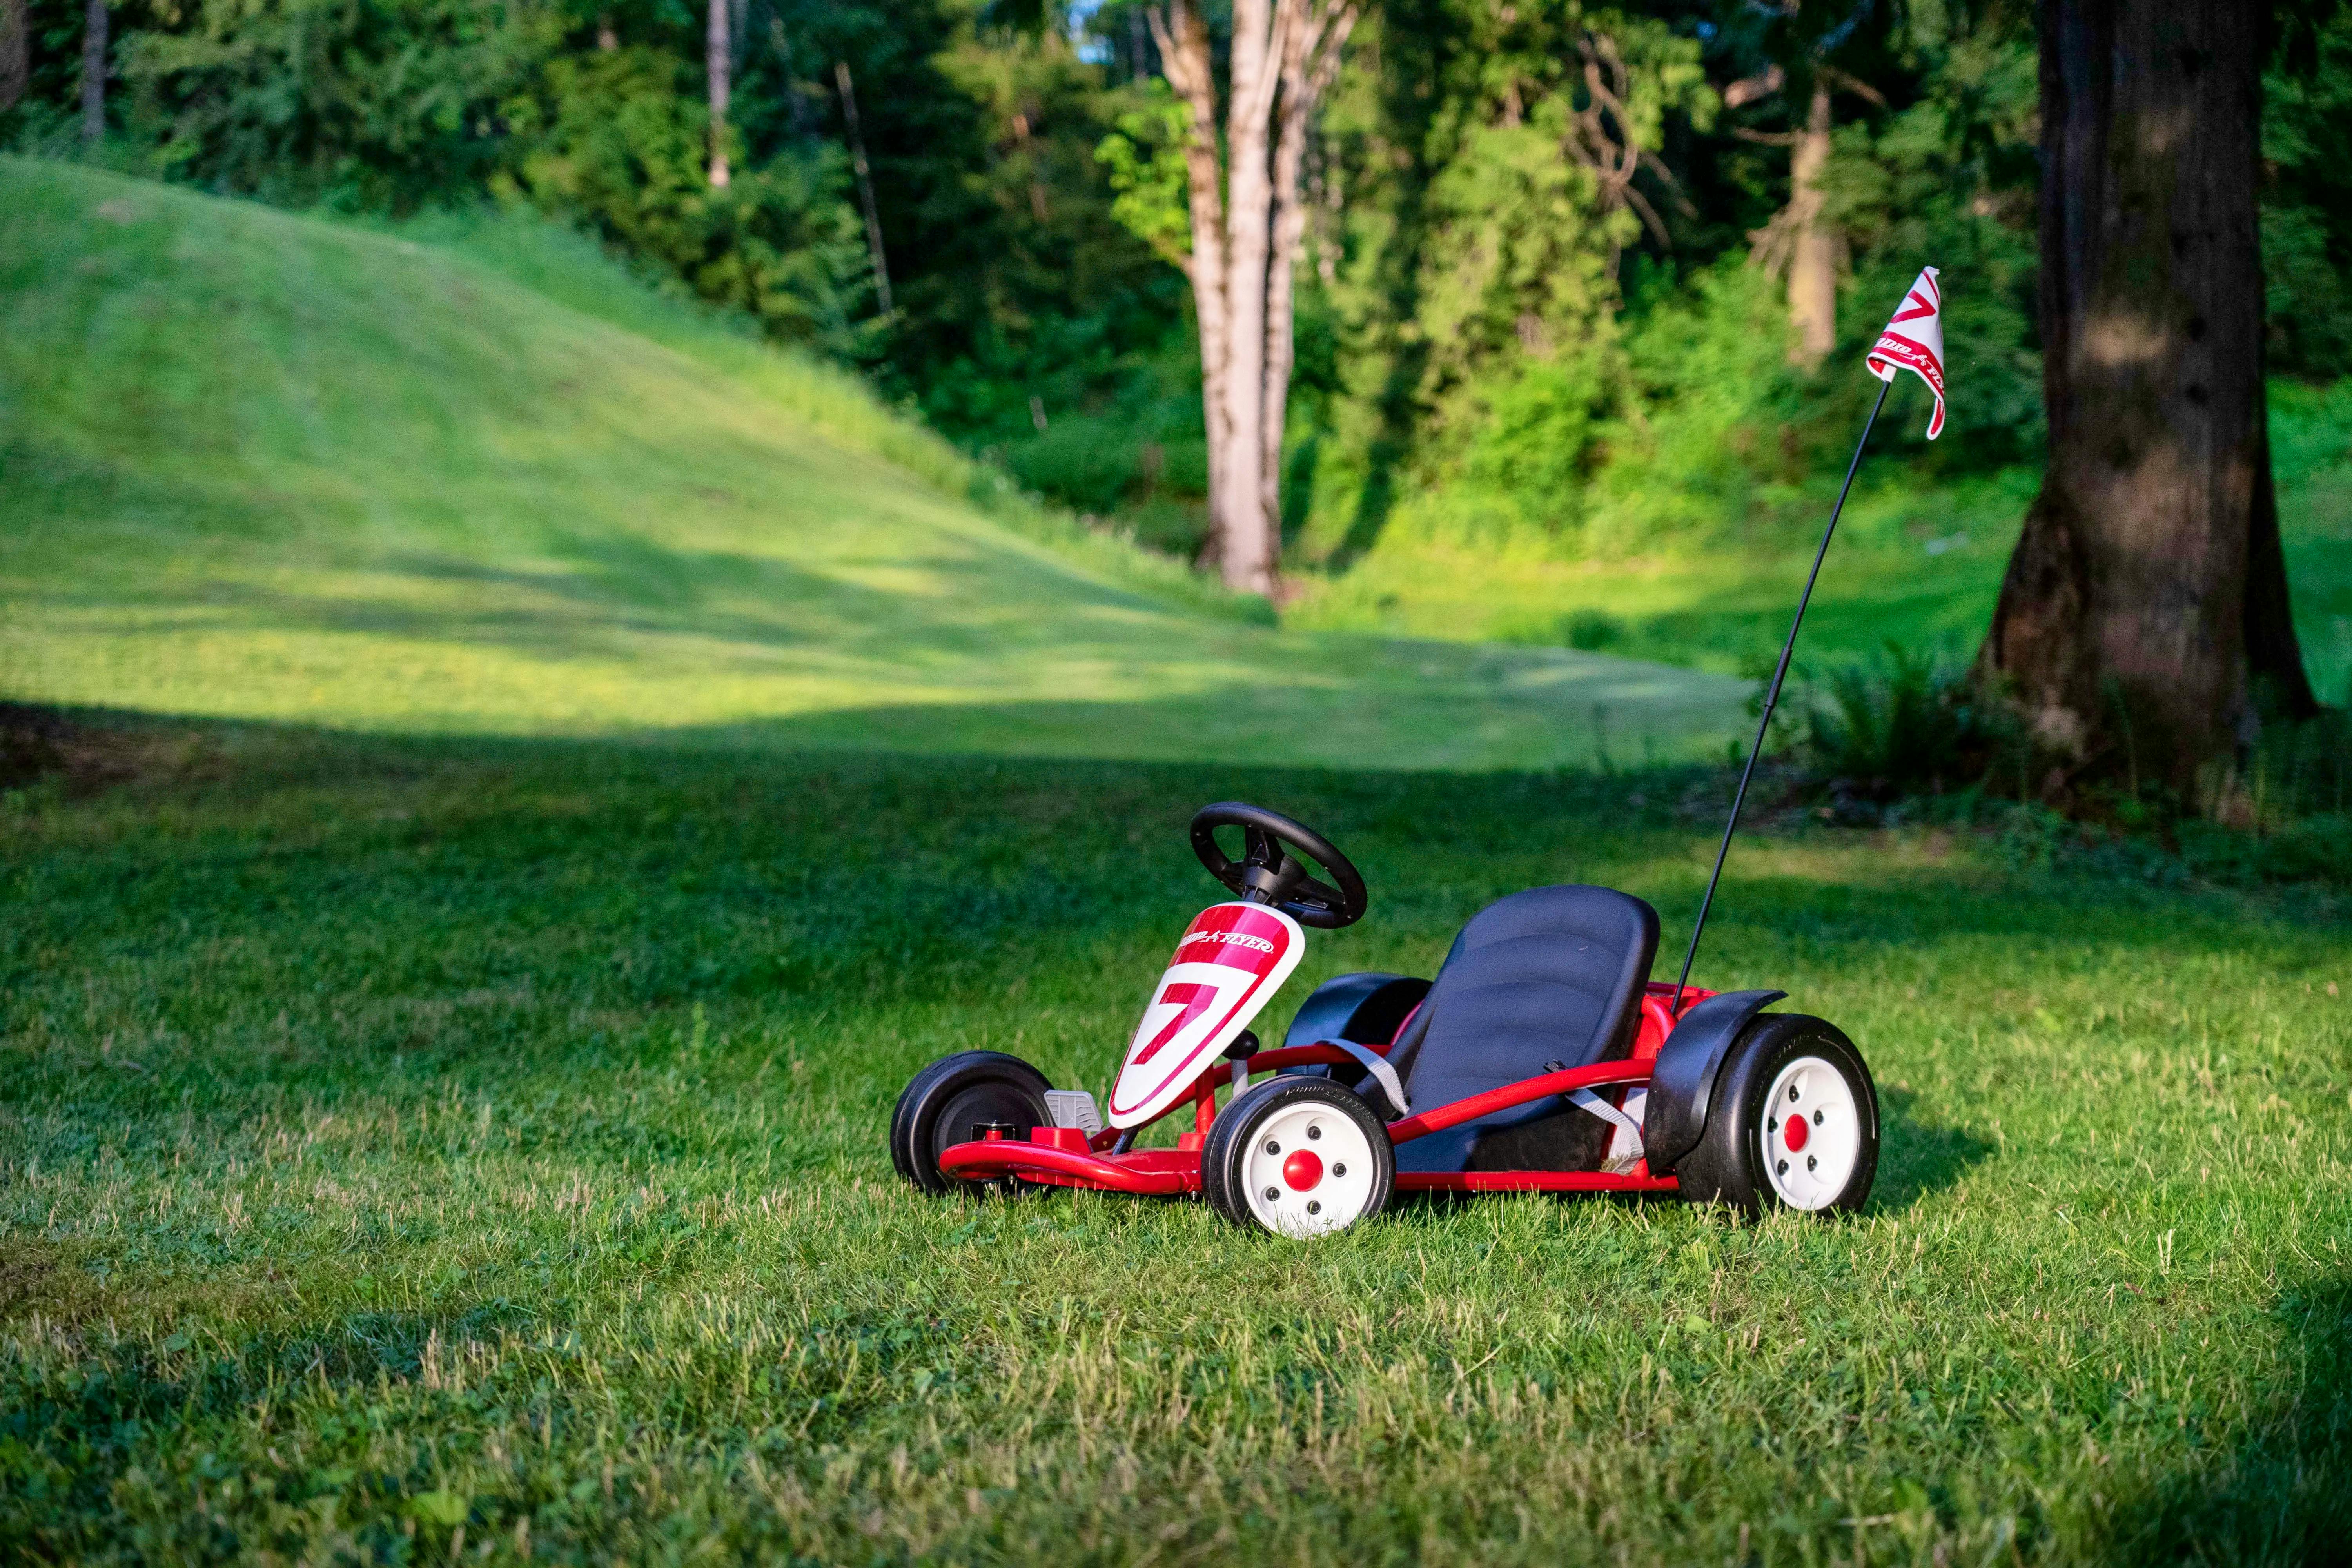 Toy Review: Radio-Flyer Ultimate Go-Kart is ultimately fun